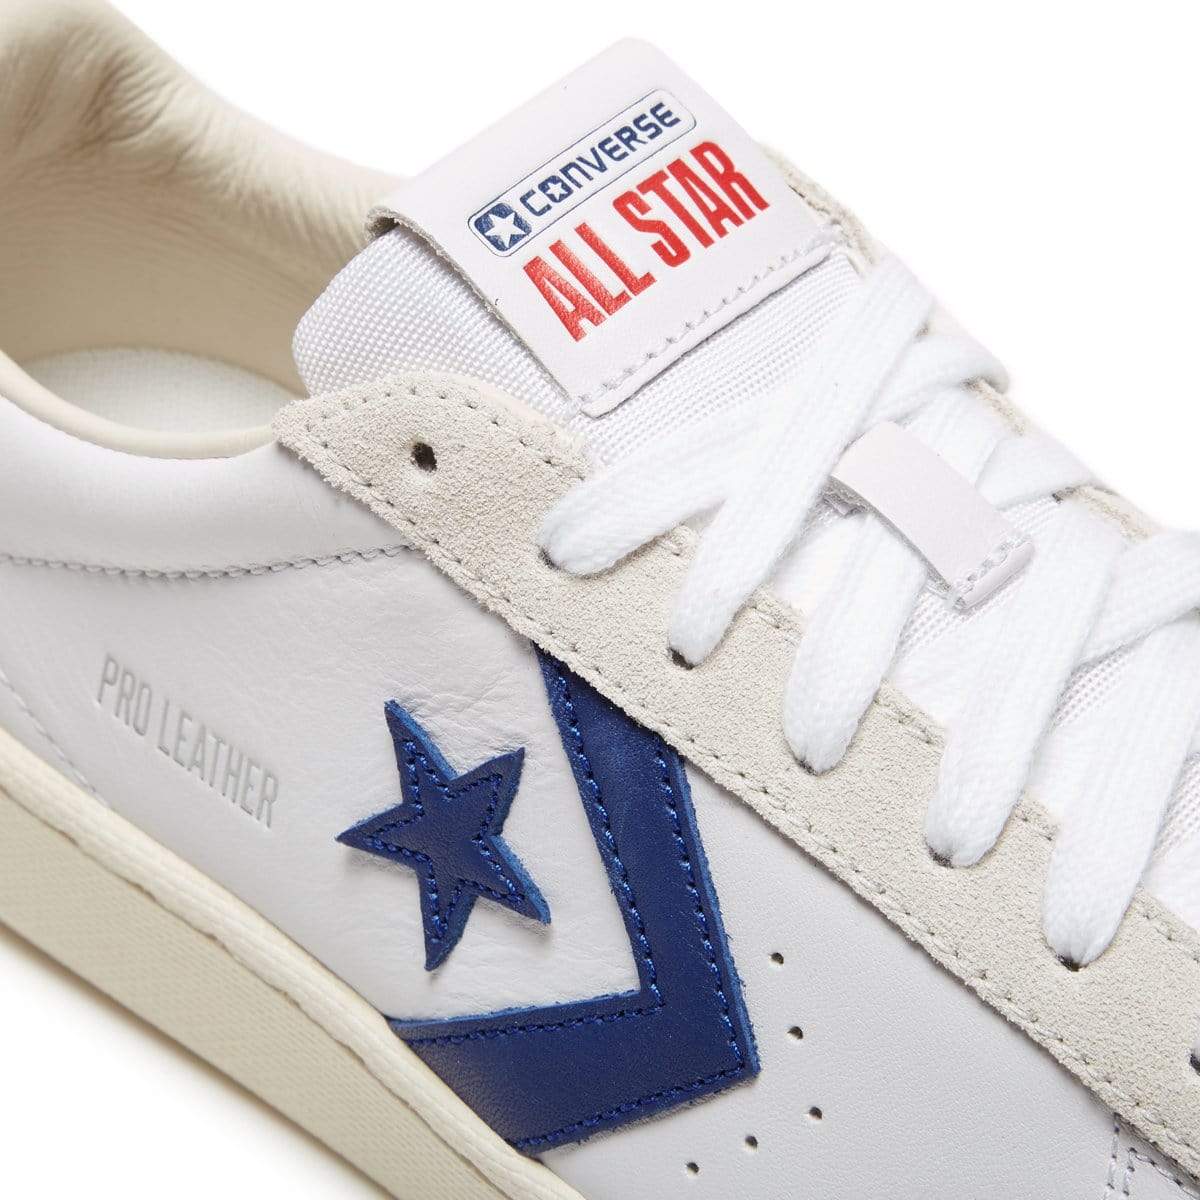 Converse Casual PRO LEATHER OX